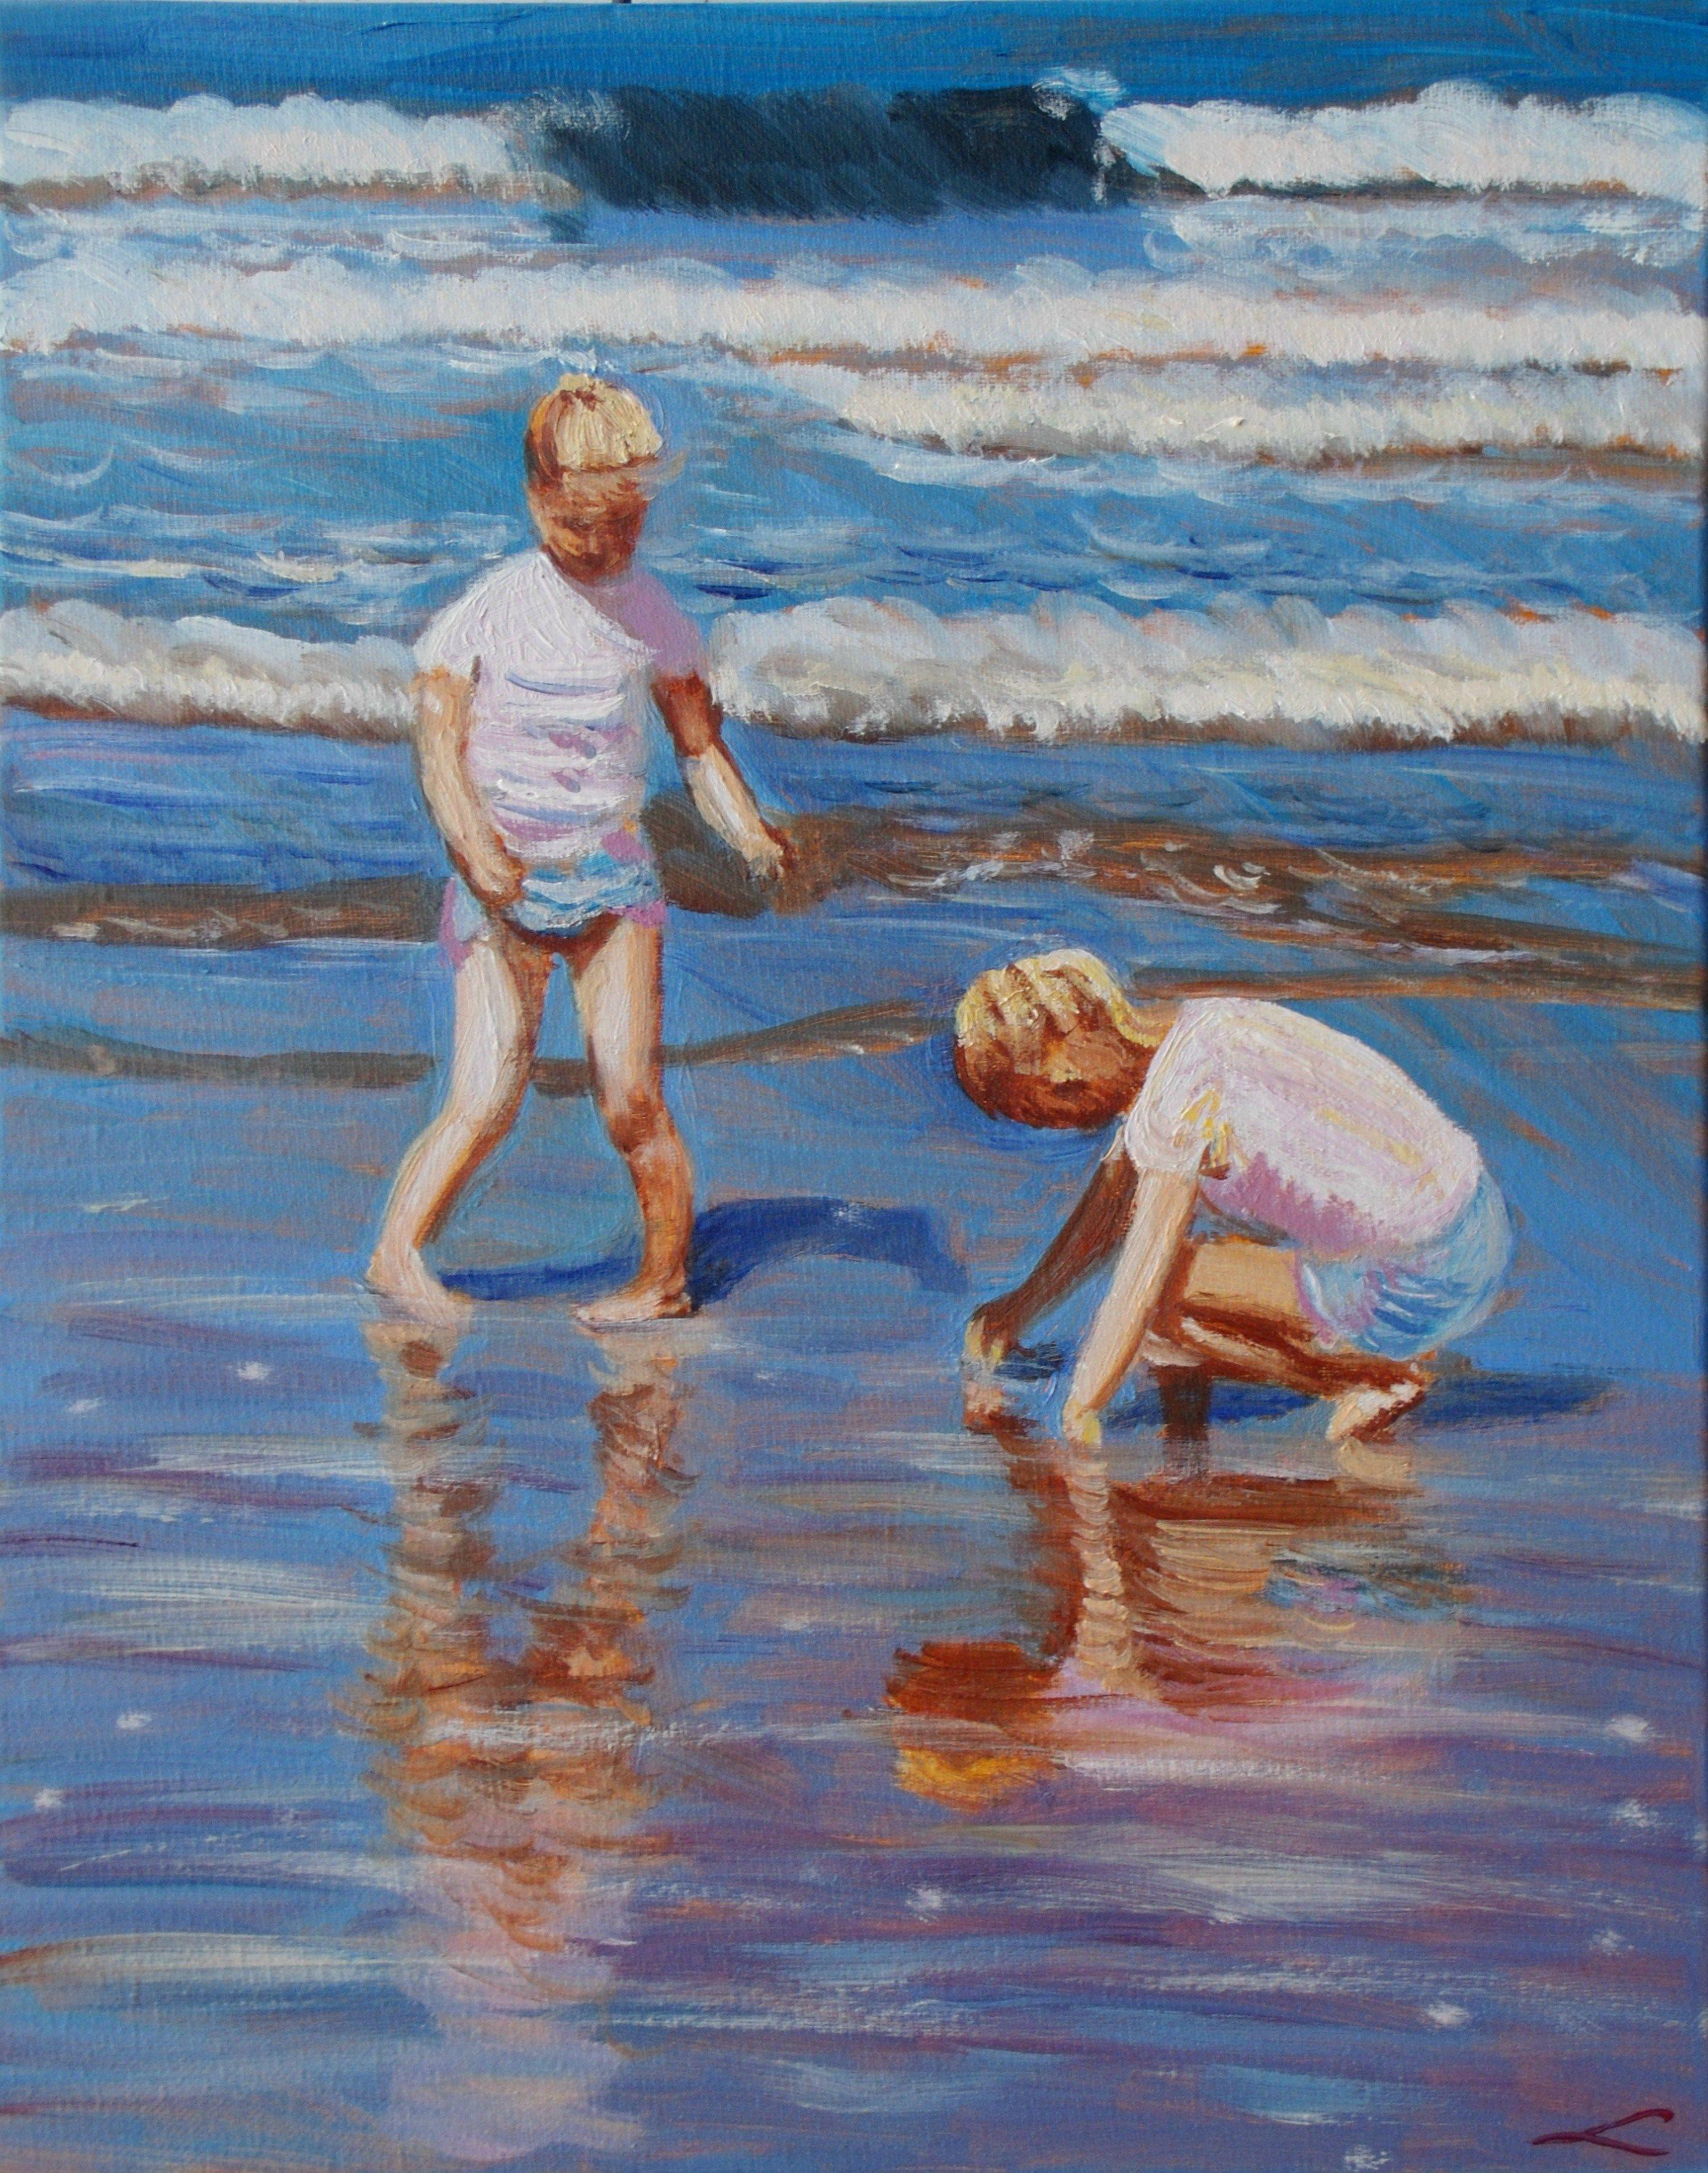 Two small girls at the sea. Alla prima oil painting with few final tuches when dry. Beach Paintings always inspire thoughts of holidays, long walks, warm breezes and relaxation. beach and ocean themed paintings that will bring the outdoors inside